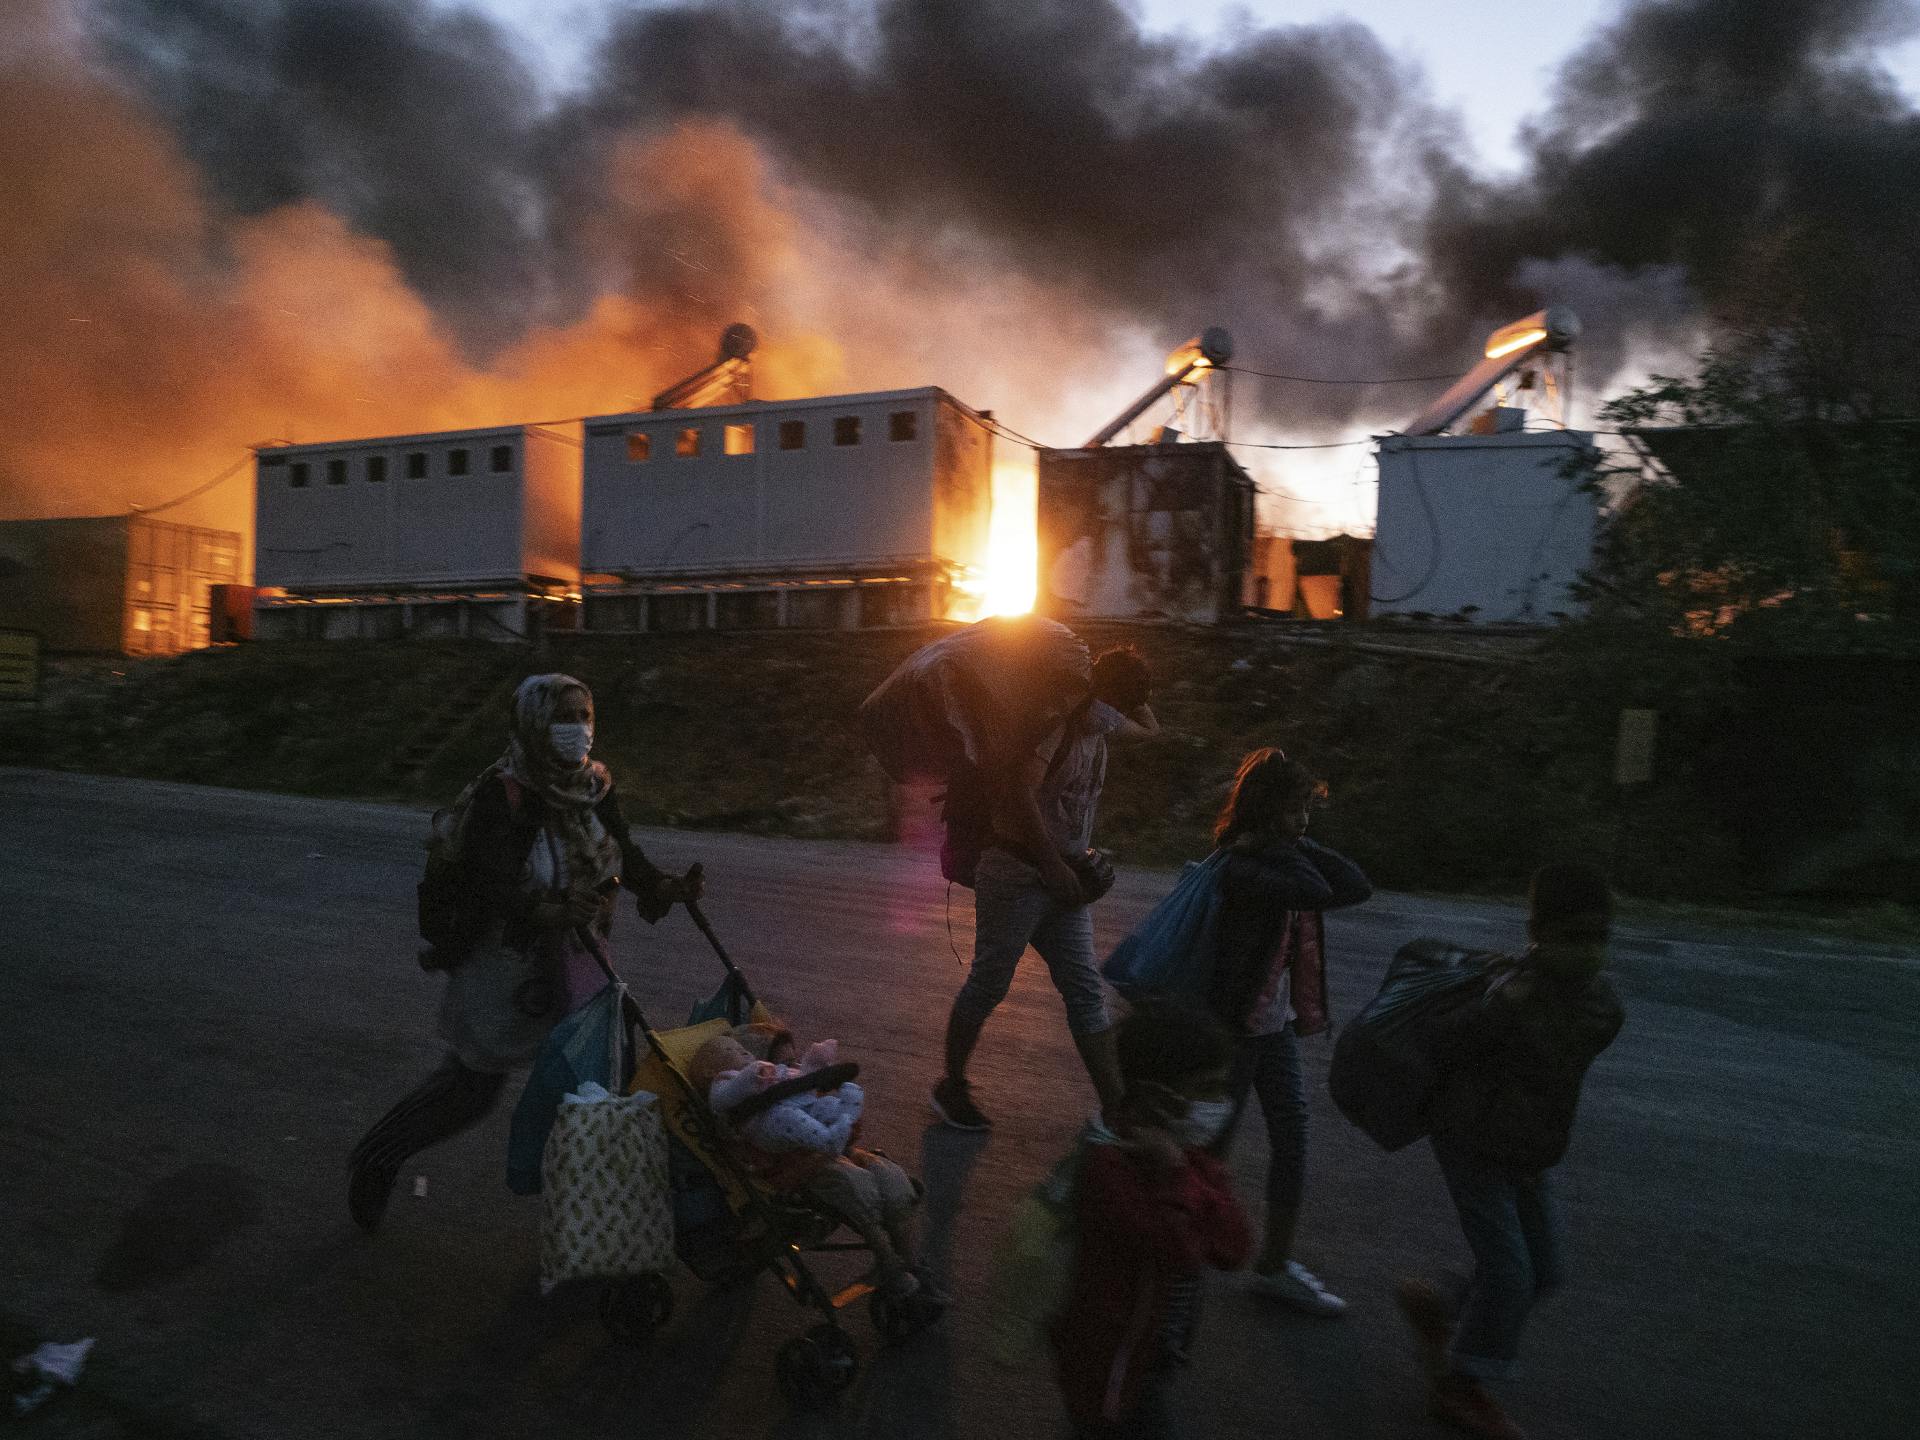 Refugees and asylum seekers walk with their possessions as a fire burns behind them in Lesbos, Greece. Photography by Enri Canaj.